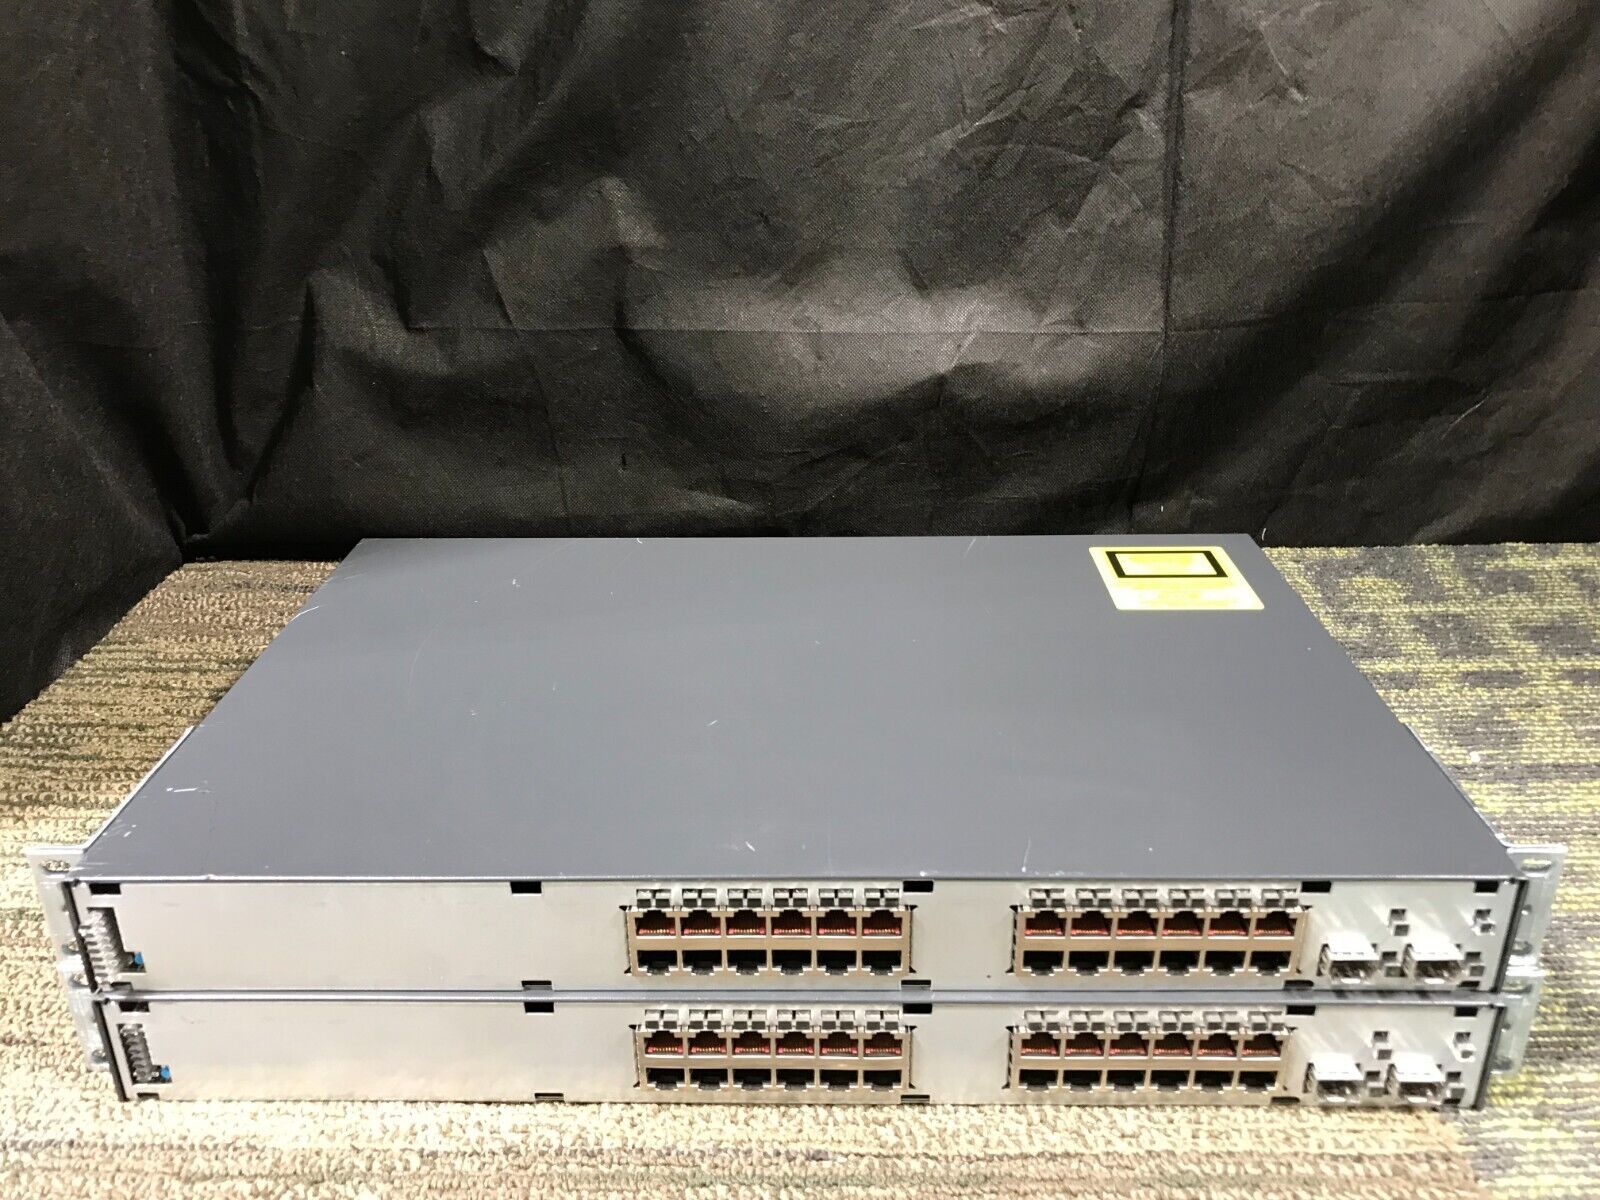 (LOT OF 2) Cisco Catalyst WS-C3750-24PS-S 3750 Series 24-Port Switch